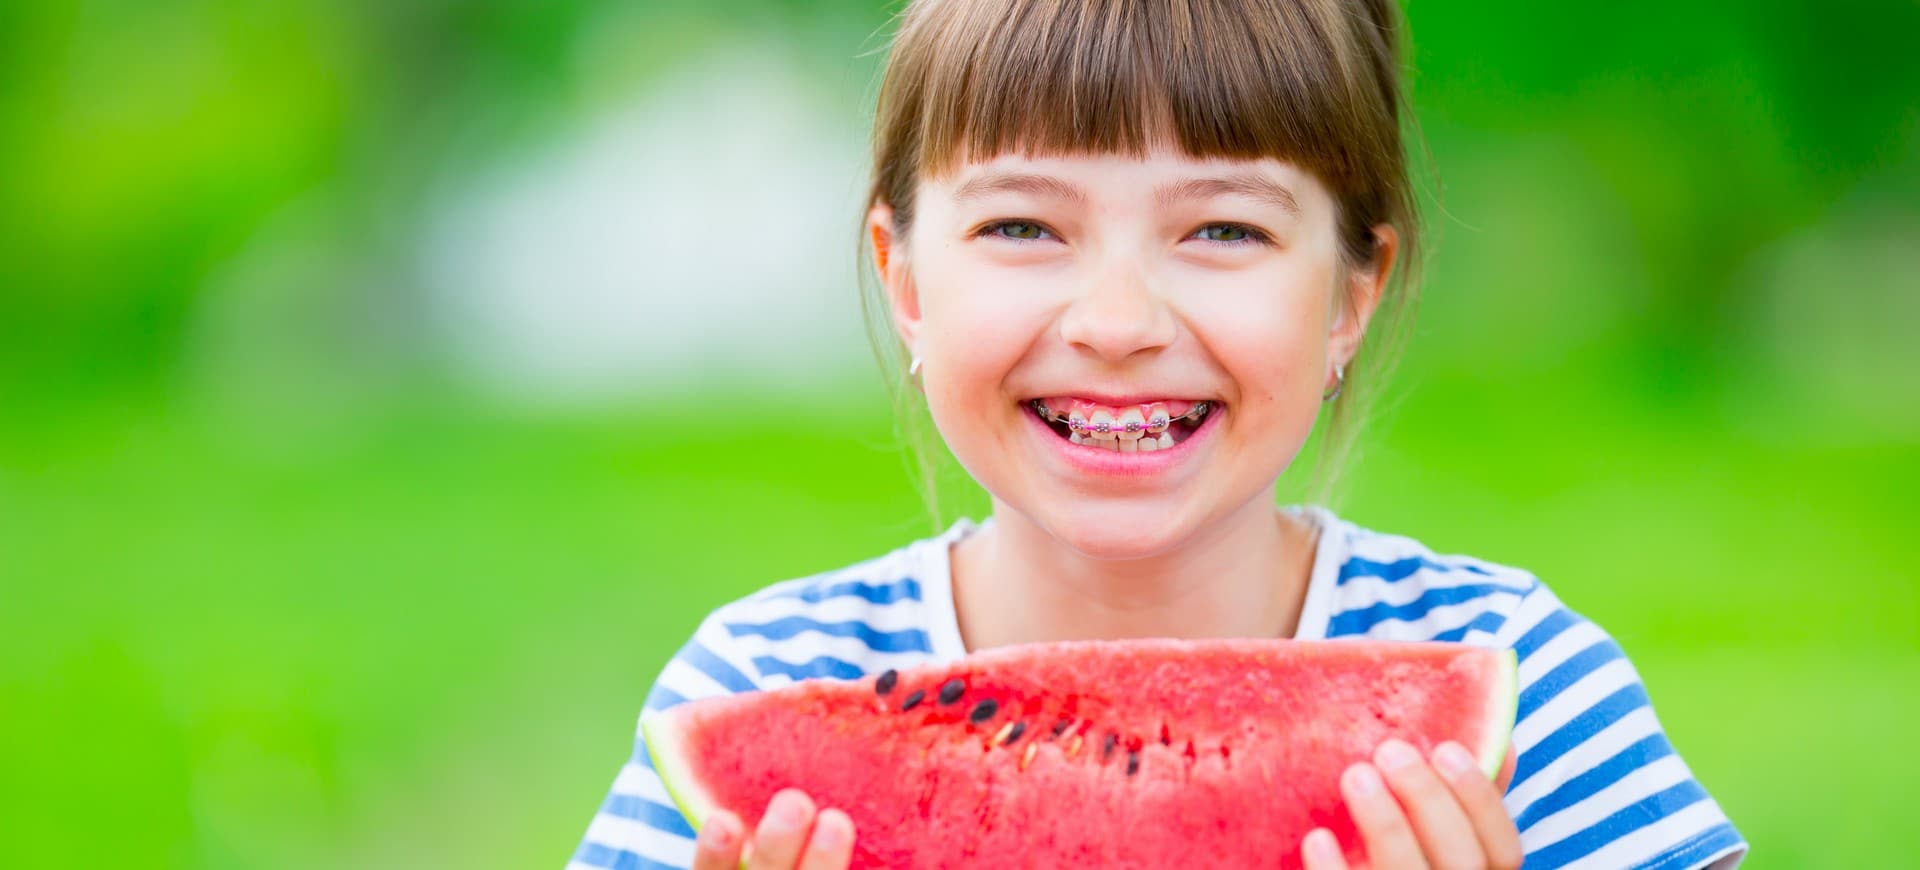 Benefits of early orthodontic treatment for children